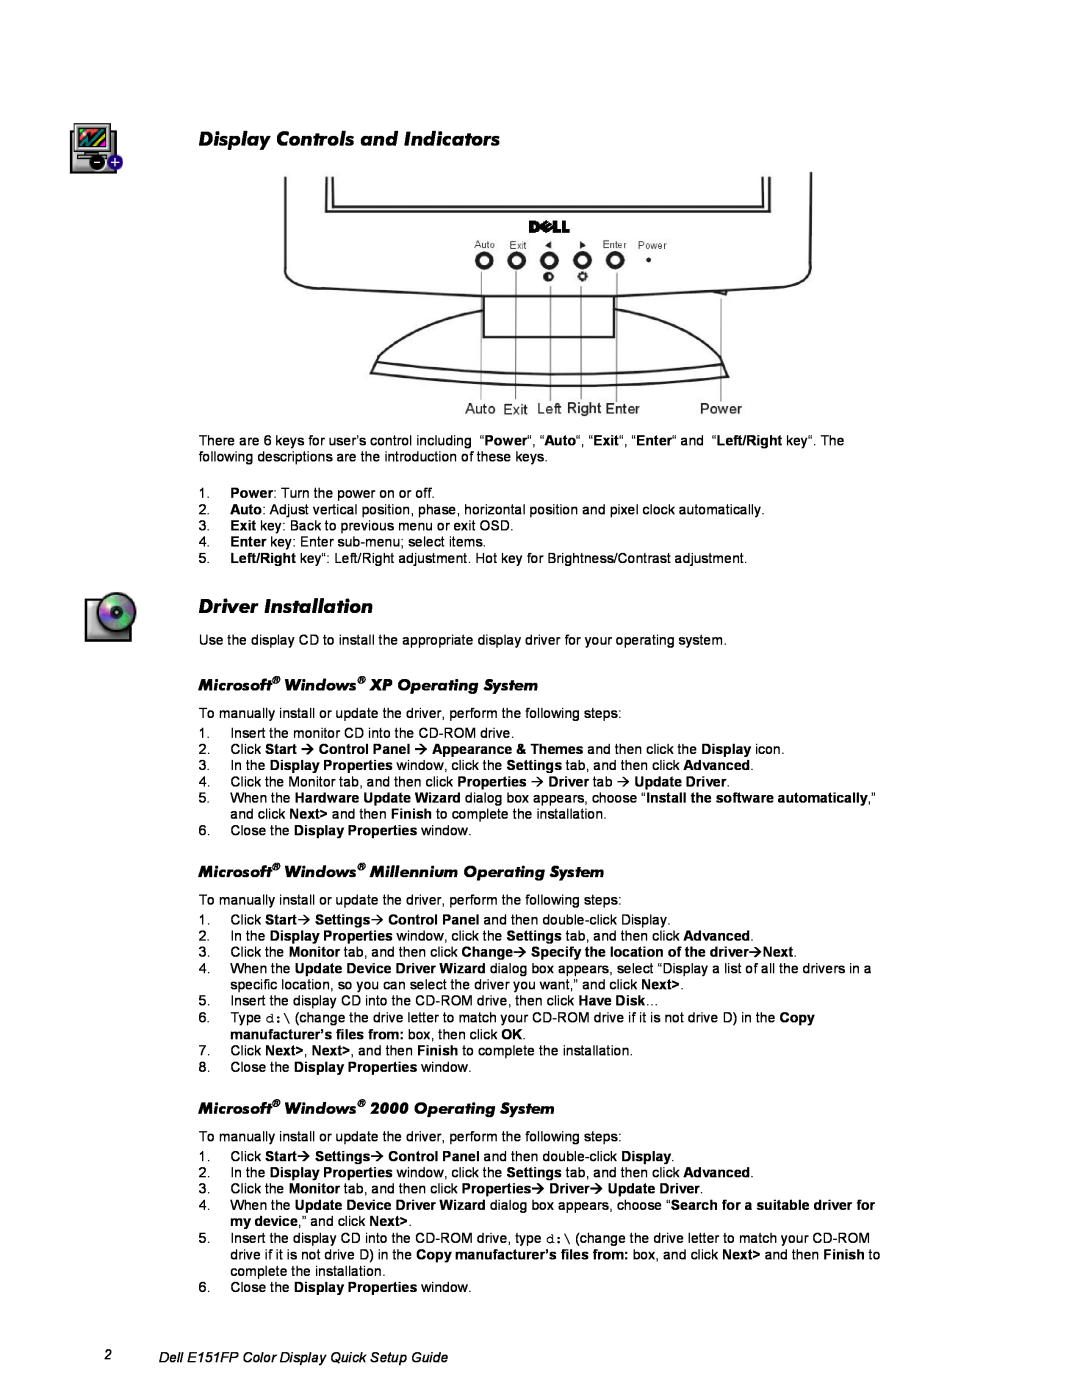 Dell E151FP setup guide Display Controls and Indicators, Driver Installation, Microsoft Windows XP Operating System 